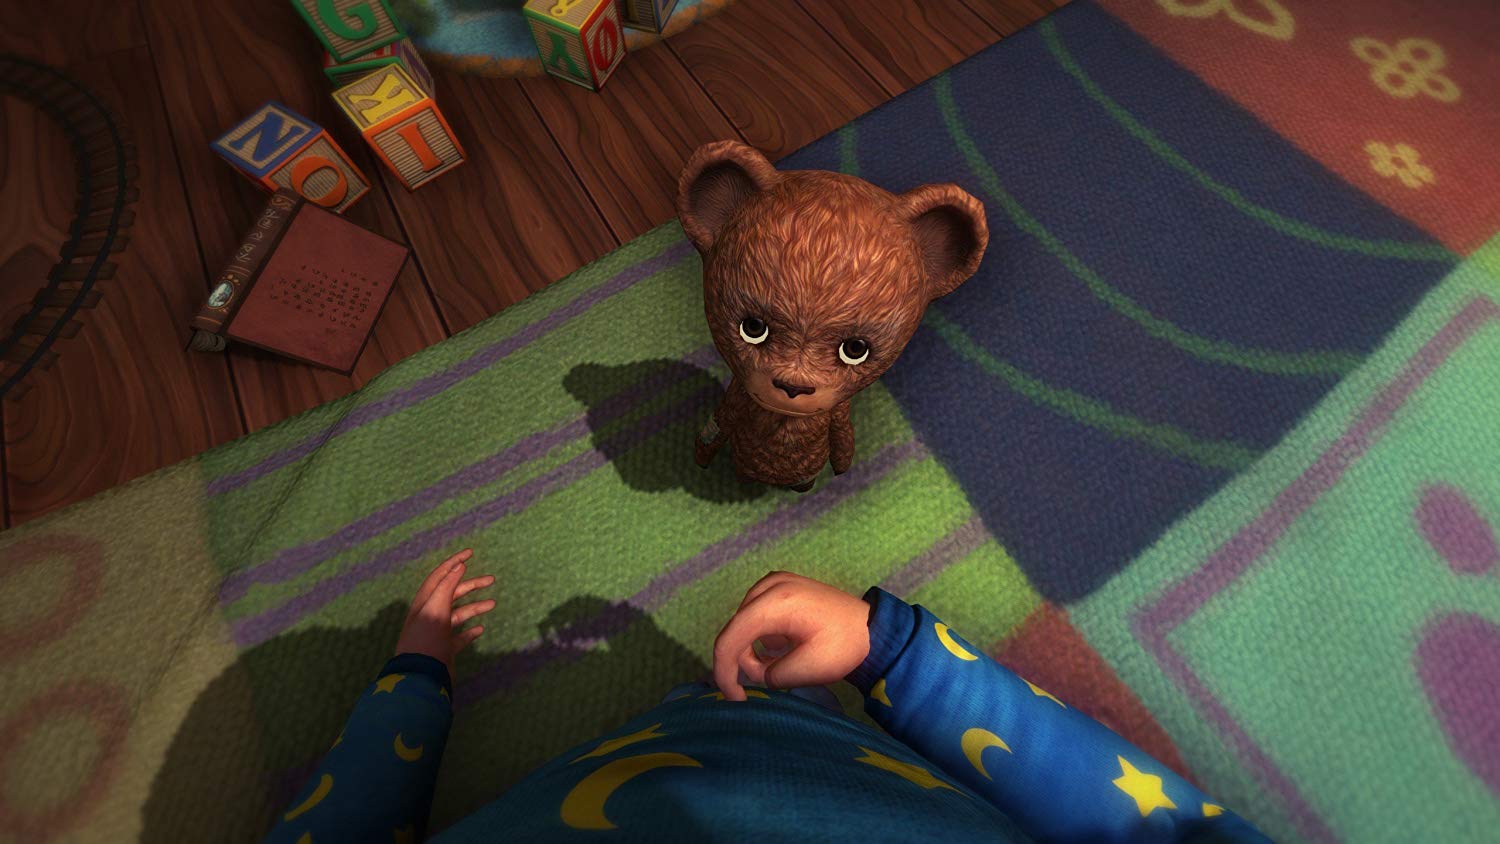 Among the Sleep - first person view of a boy looking down at his teddy bear